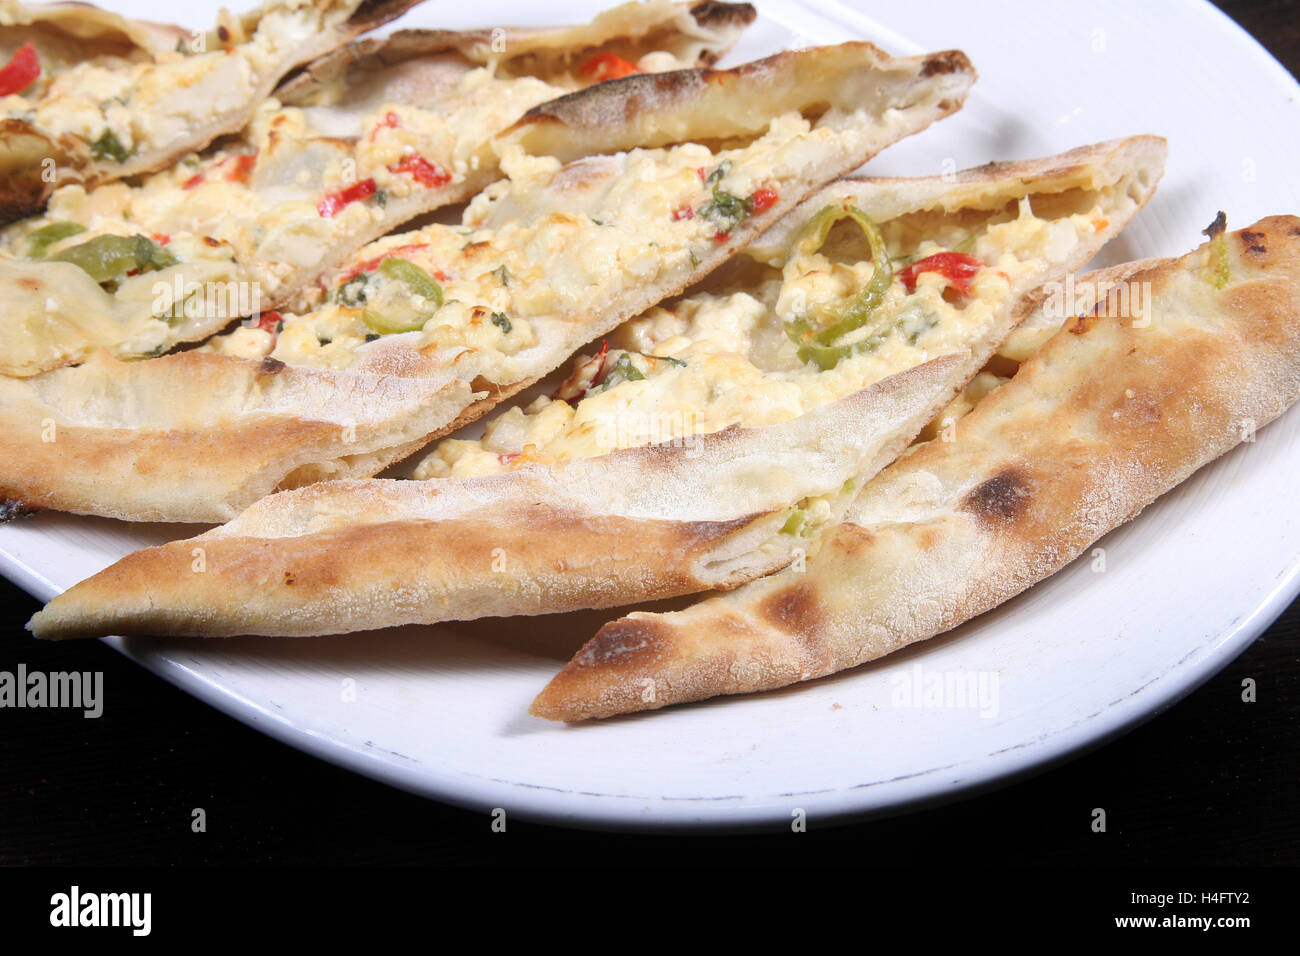 Turkish pizza (pide) with feta cheese Stock Photo